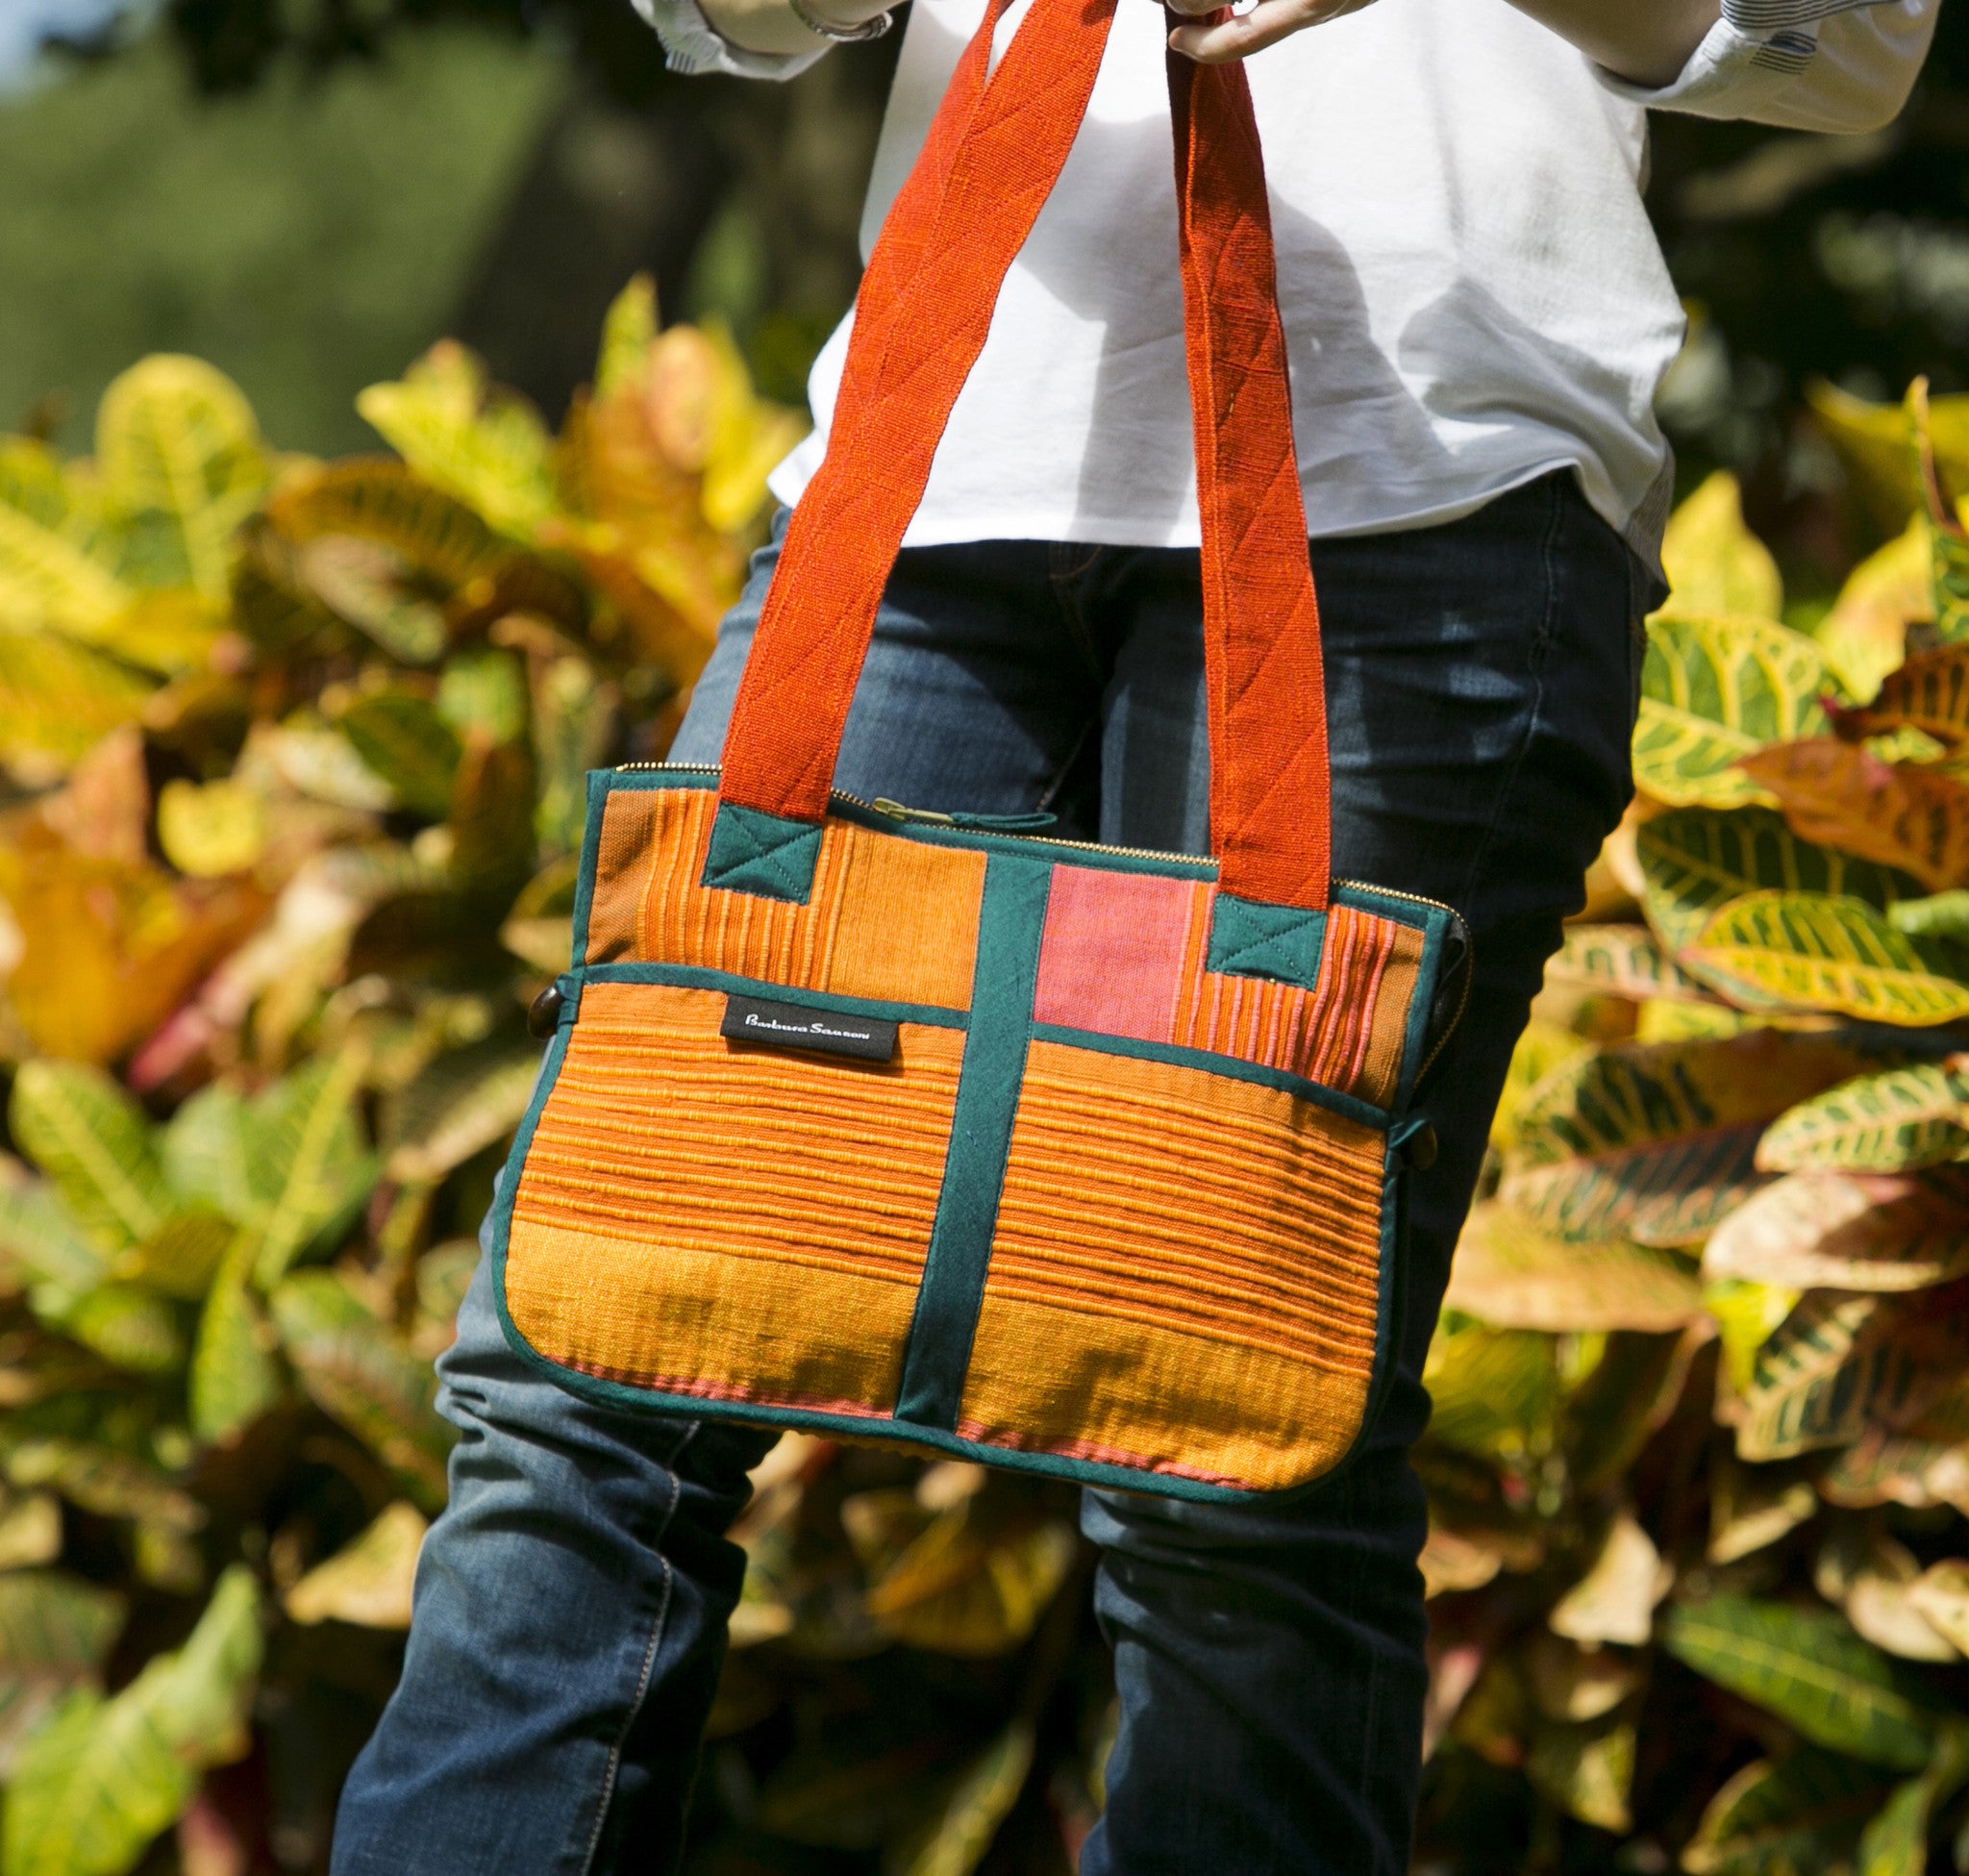 Barefoot Handwoven Expandable Shoulder Bag – spacious and stylish! (Sunset fabric shown)